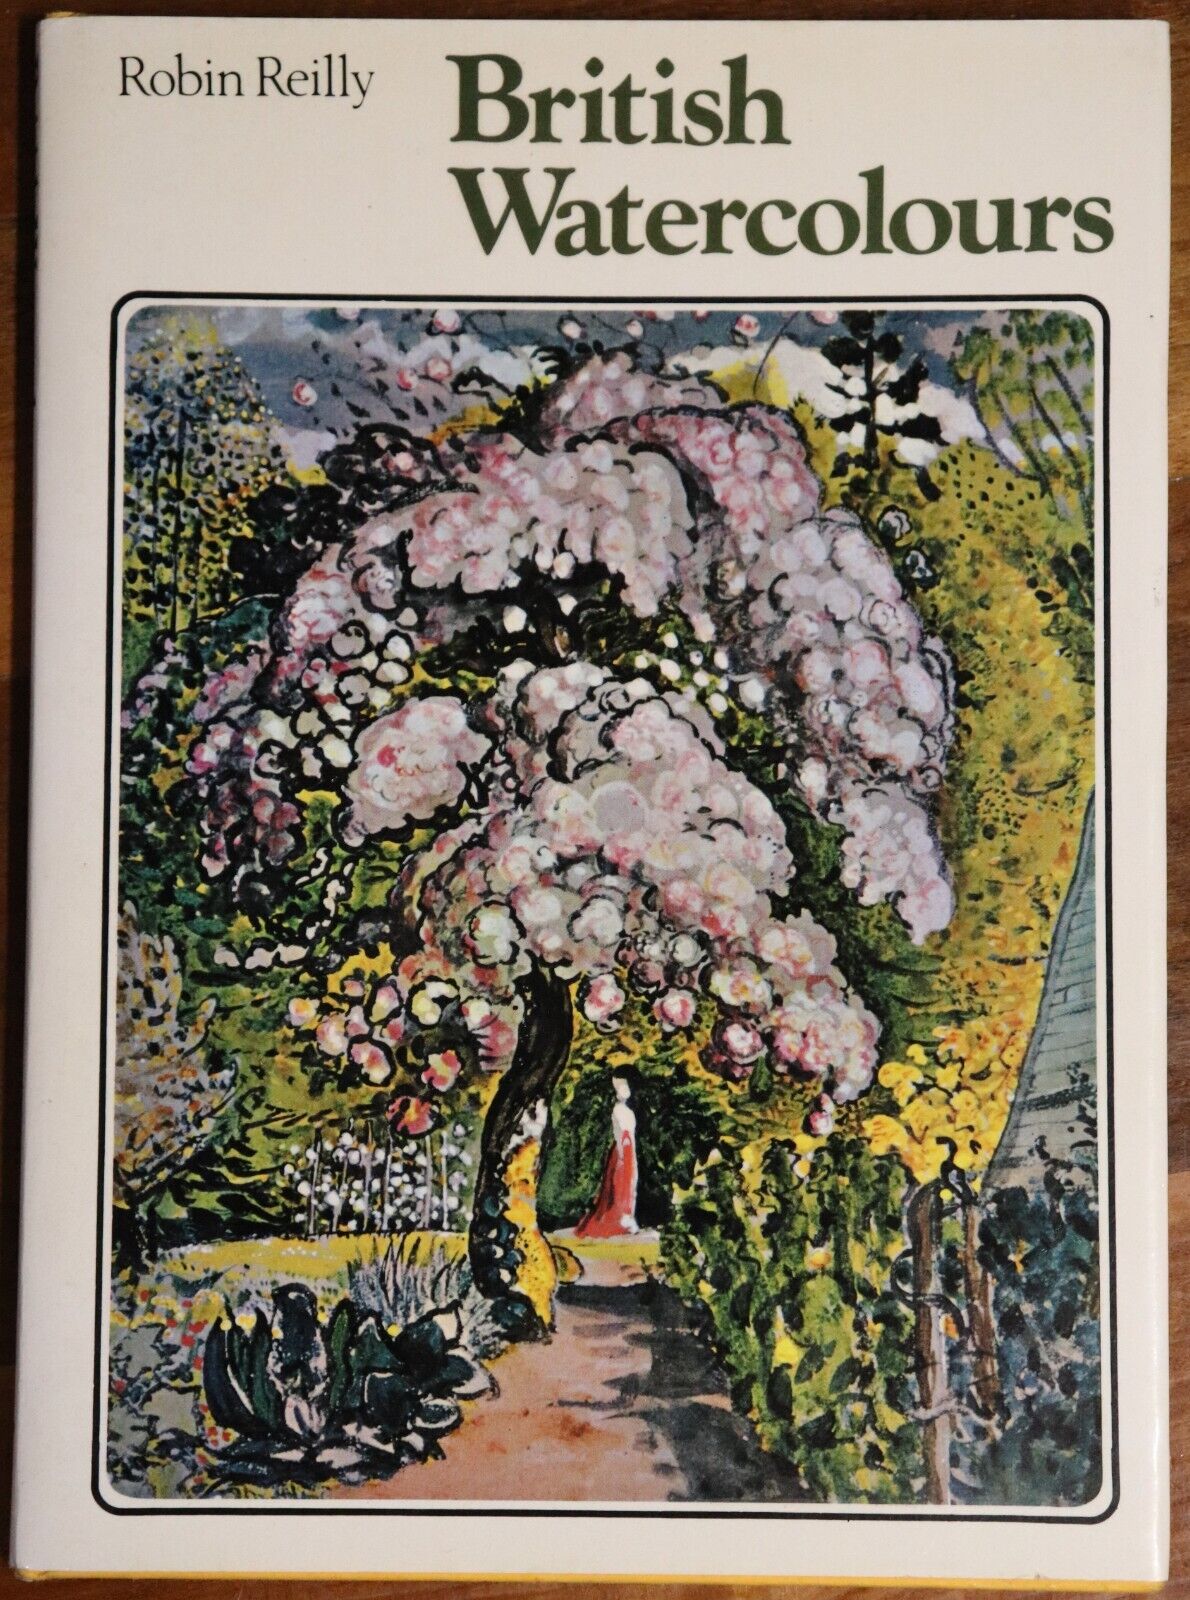 British Watercolours by Robin Reilly - 1974 - 1st Edition Vintage Art Book